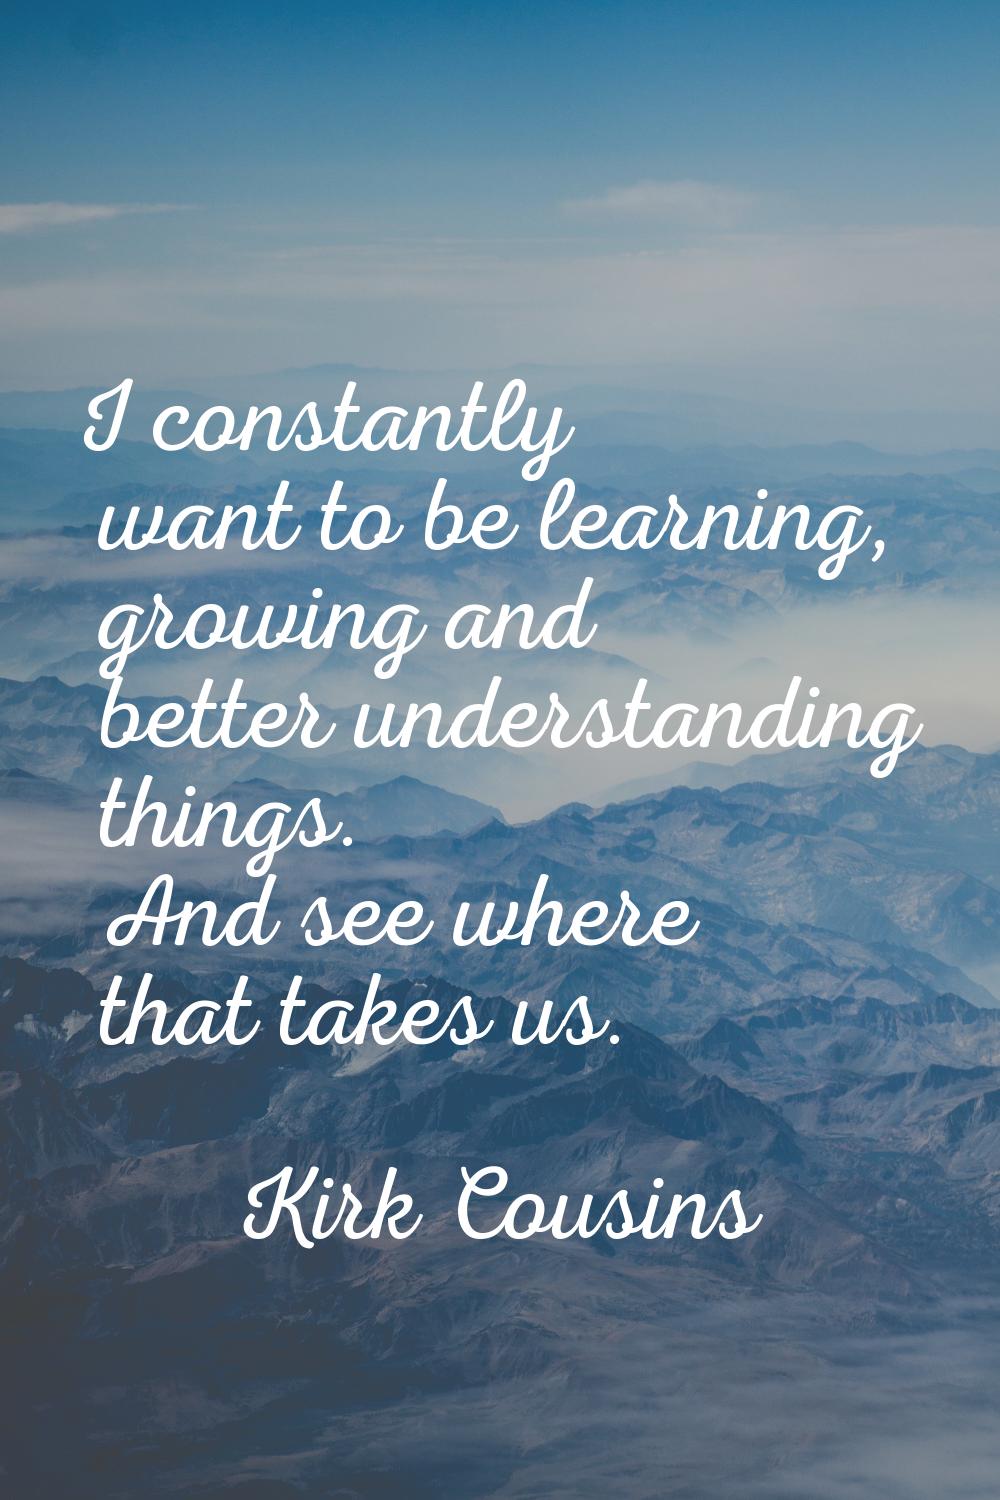 I constantly want to be learning, growing and better understanding things. And see where that takes